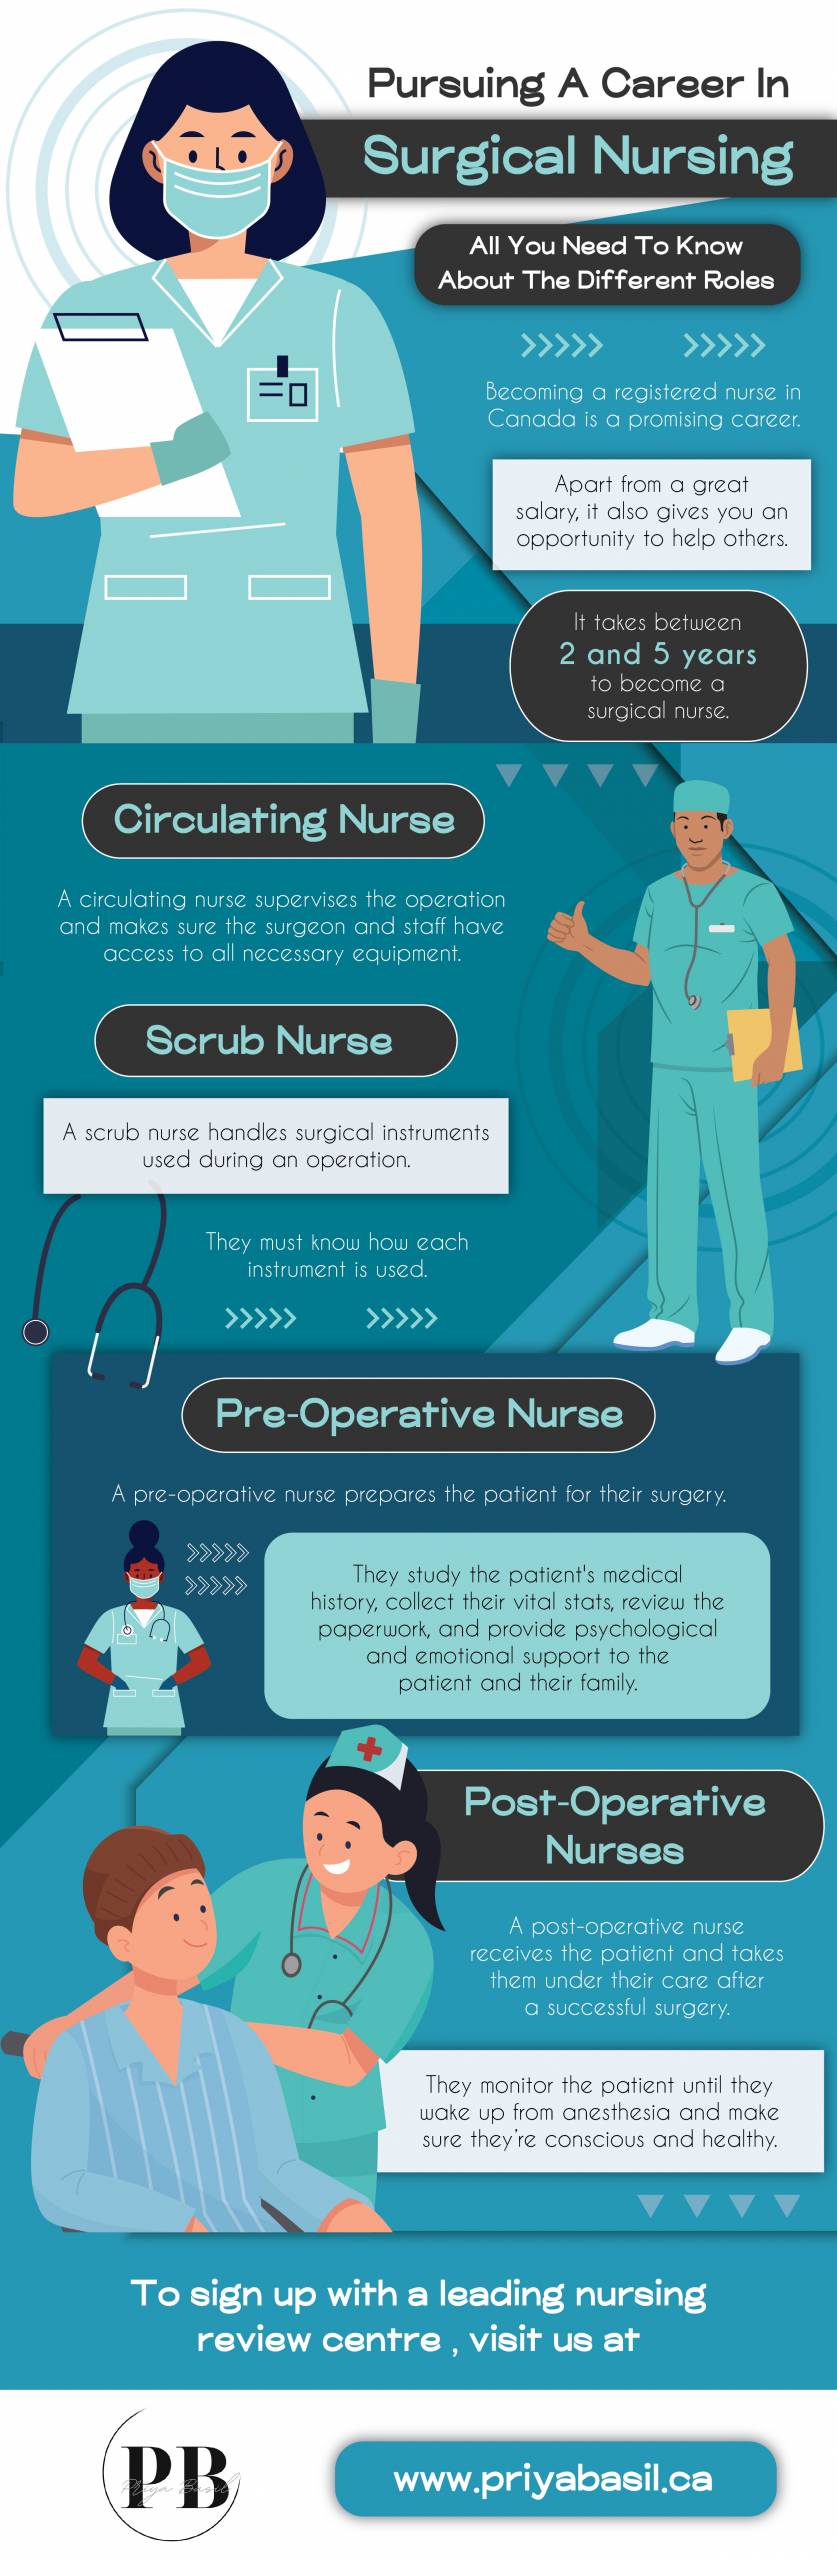 Pursuing A Career In Surgical Nursing - Infograph